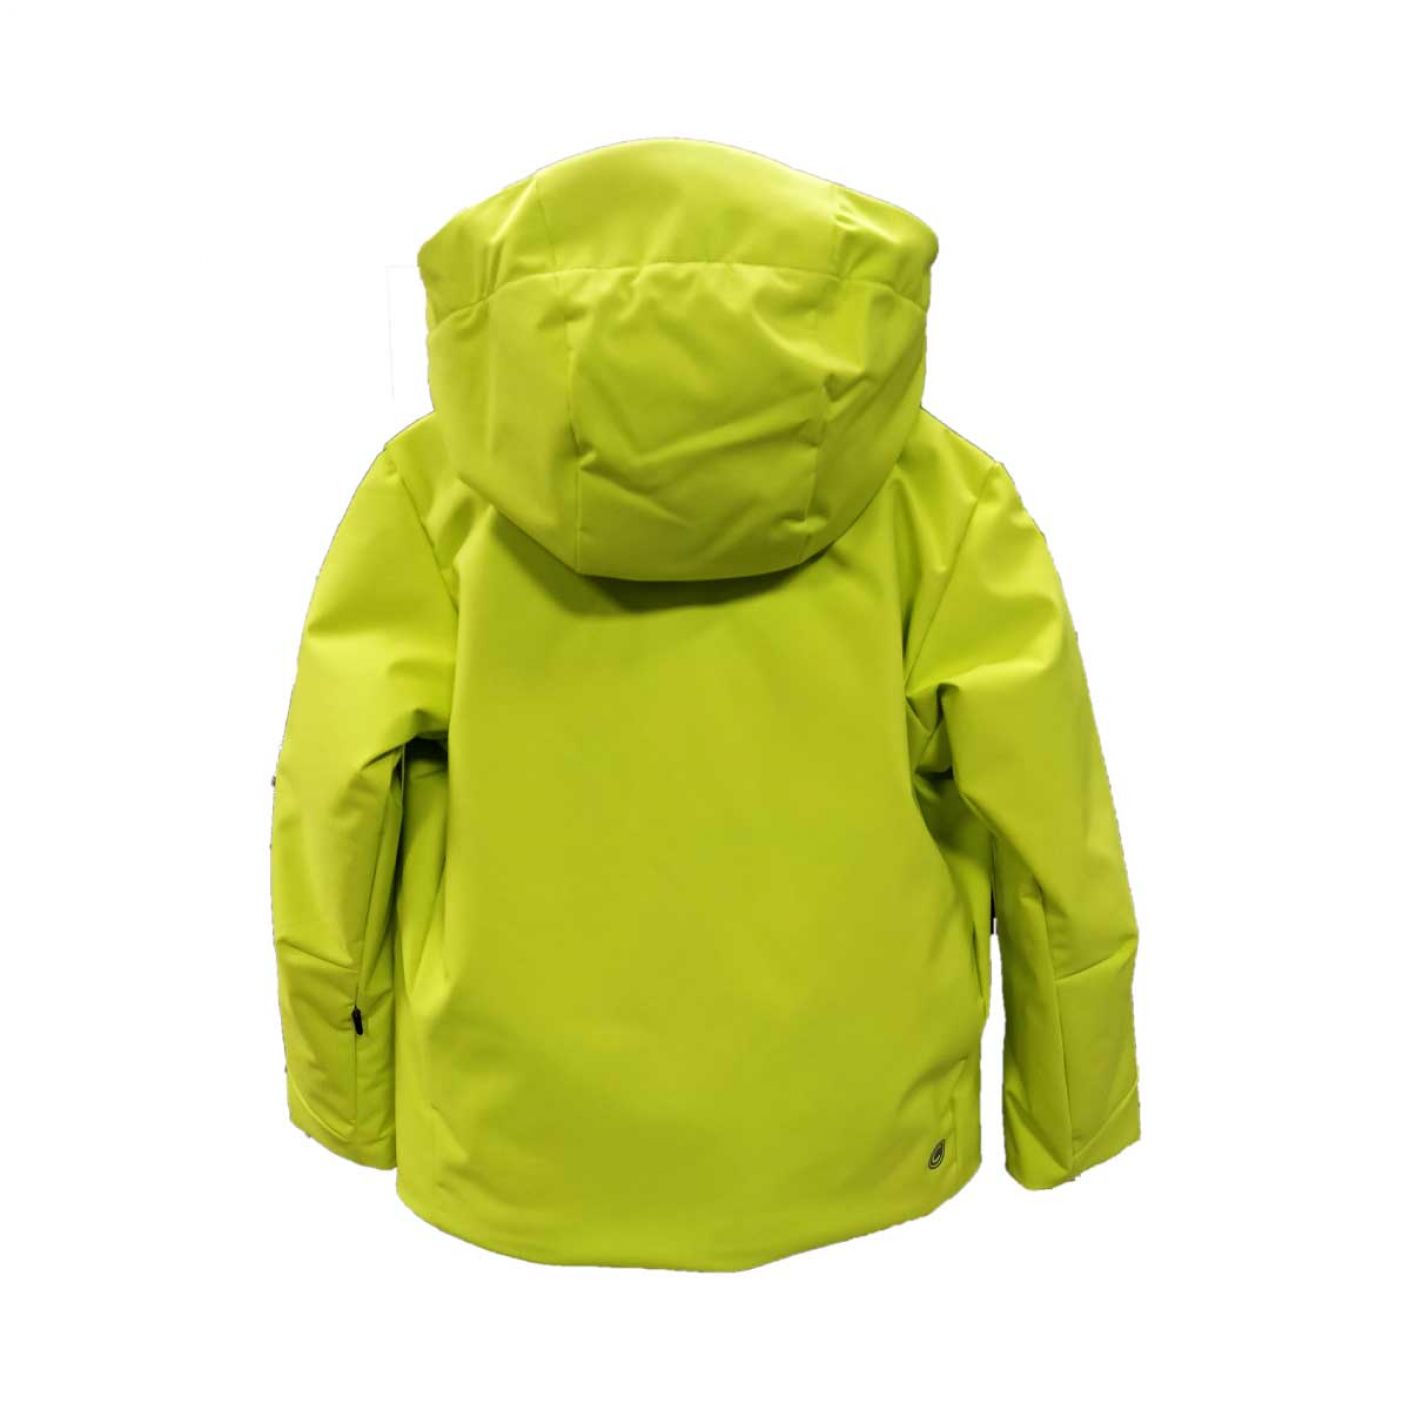 Colmar Kids Ski Suit With Acid Green Bands 4-6 Years